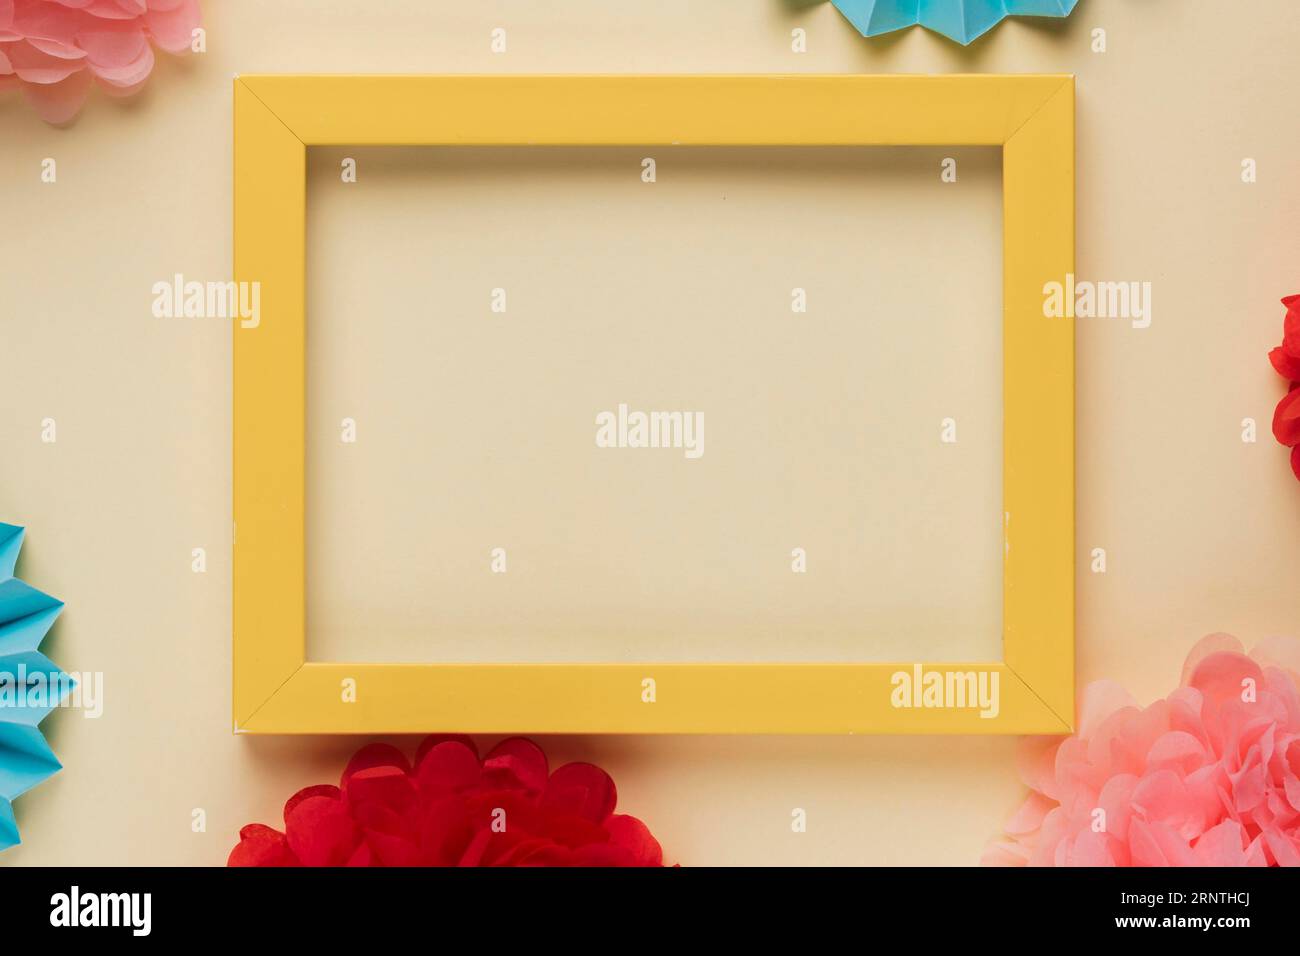 Yellow wooden border picture frame with decorated origami flowers Stock Photo